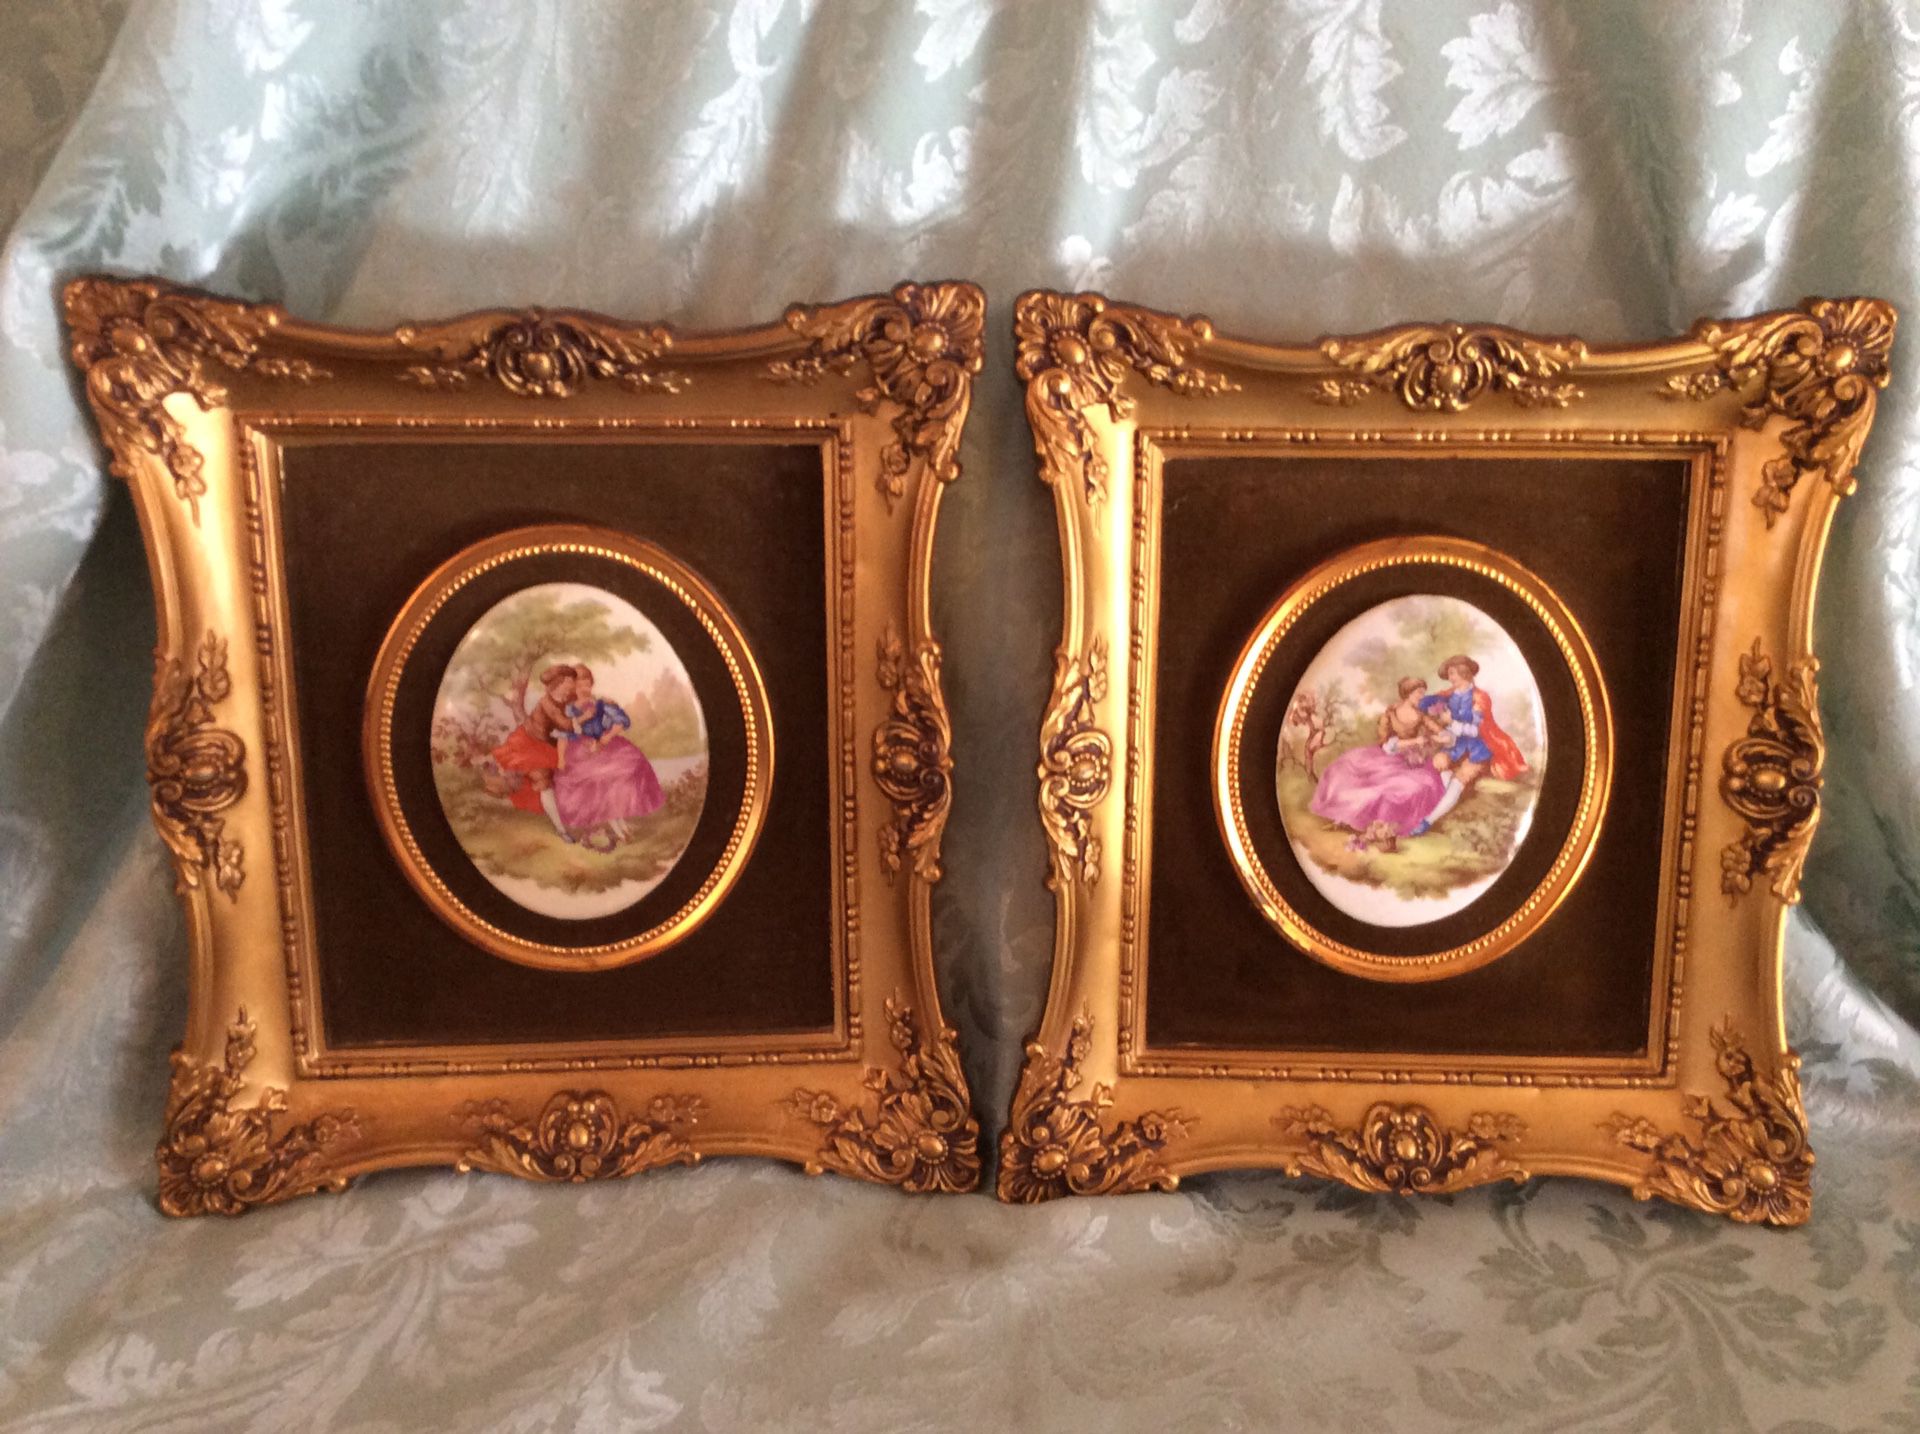 Two Victorian Style Ceramic Framed Art Pieces